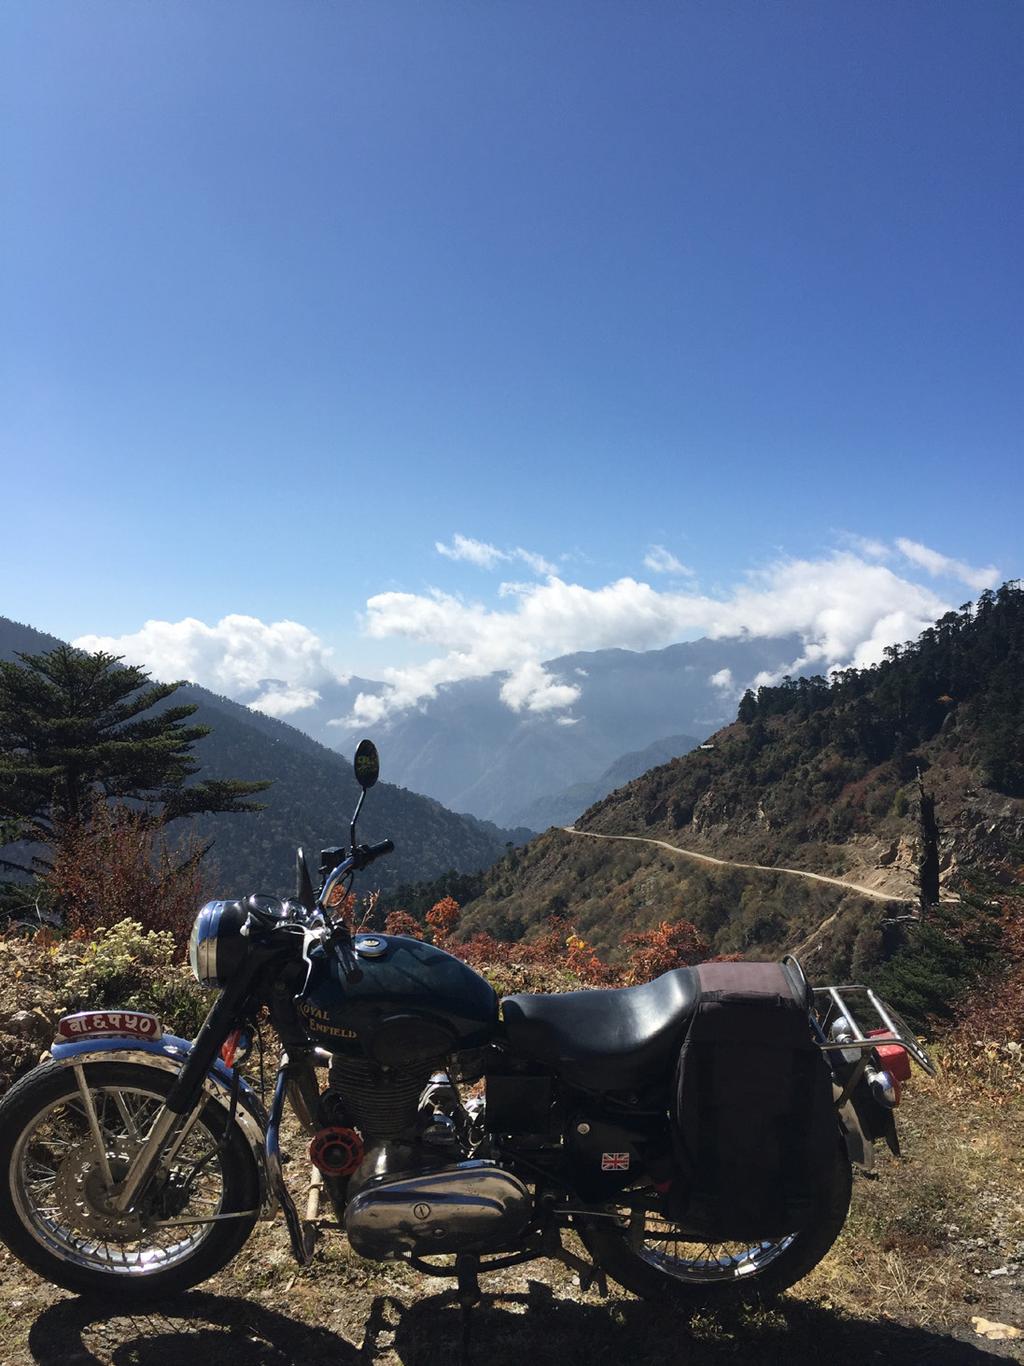 Nepal To Bhutan Ride the Dragon 15 29 October, 2017 free to relax or explore the city. Pre-arrivals into Kathmandu are welcome anytime before official tour start.